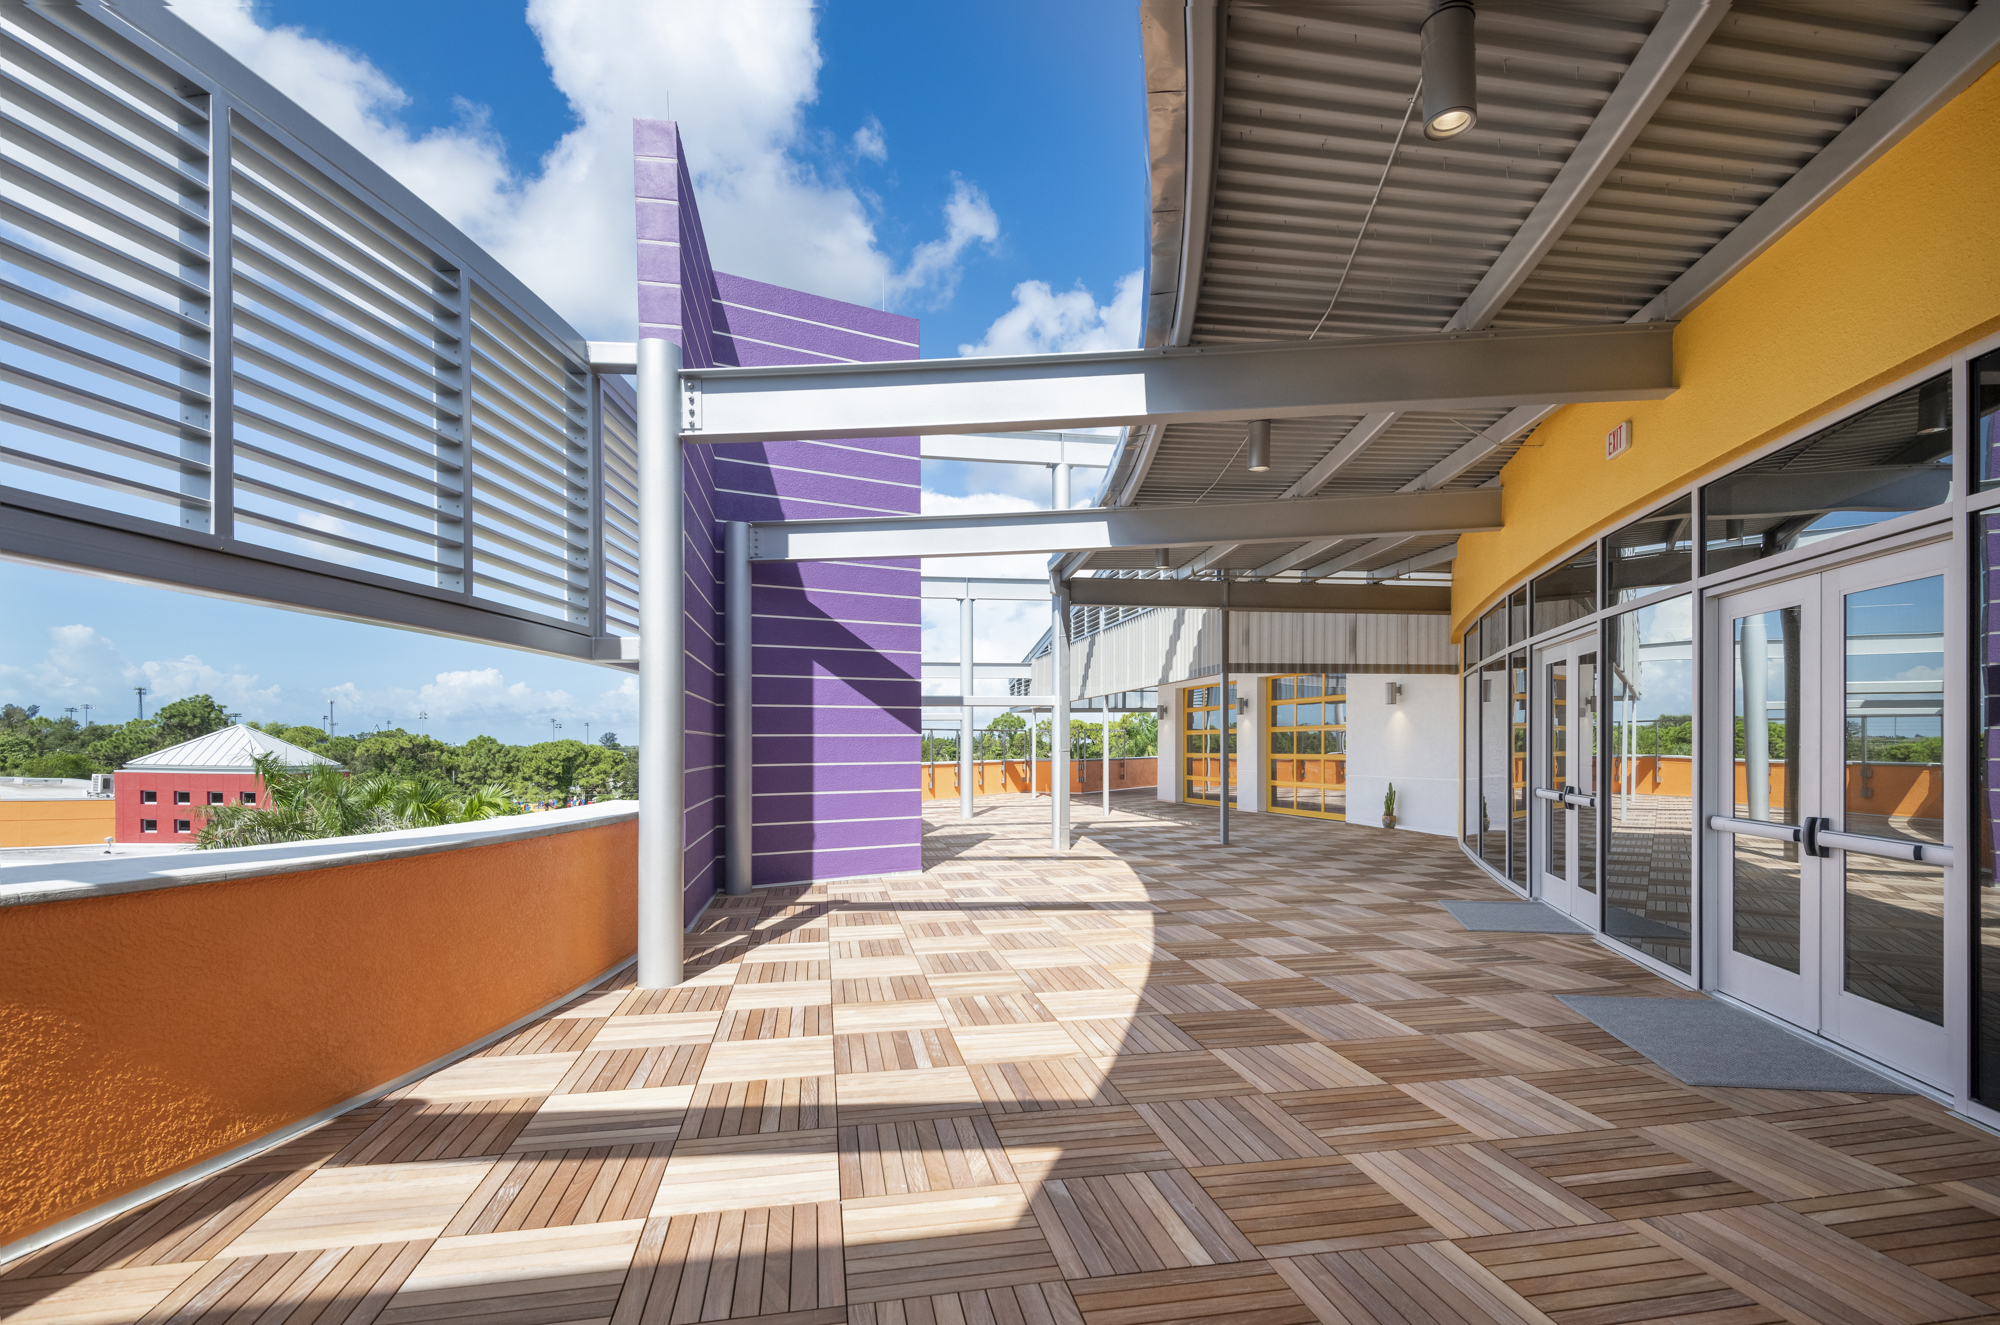 Courtesy. The Heights Early Learning & Education Center's roof is made with wood pavers from Brazil.